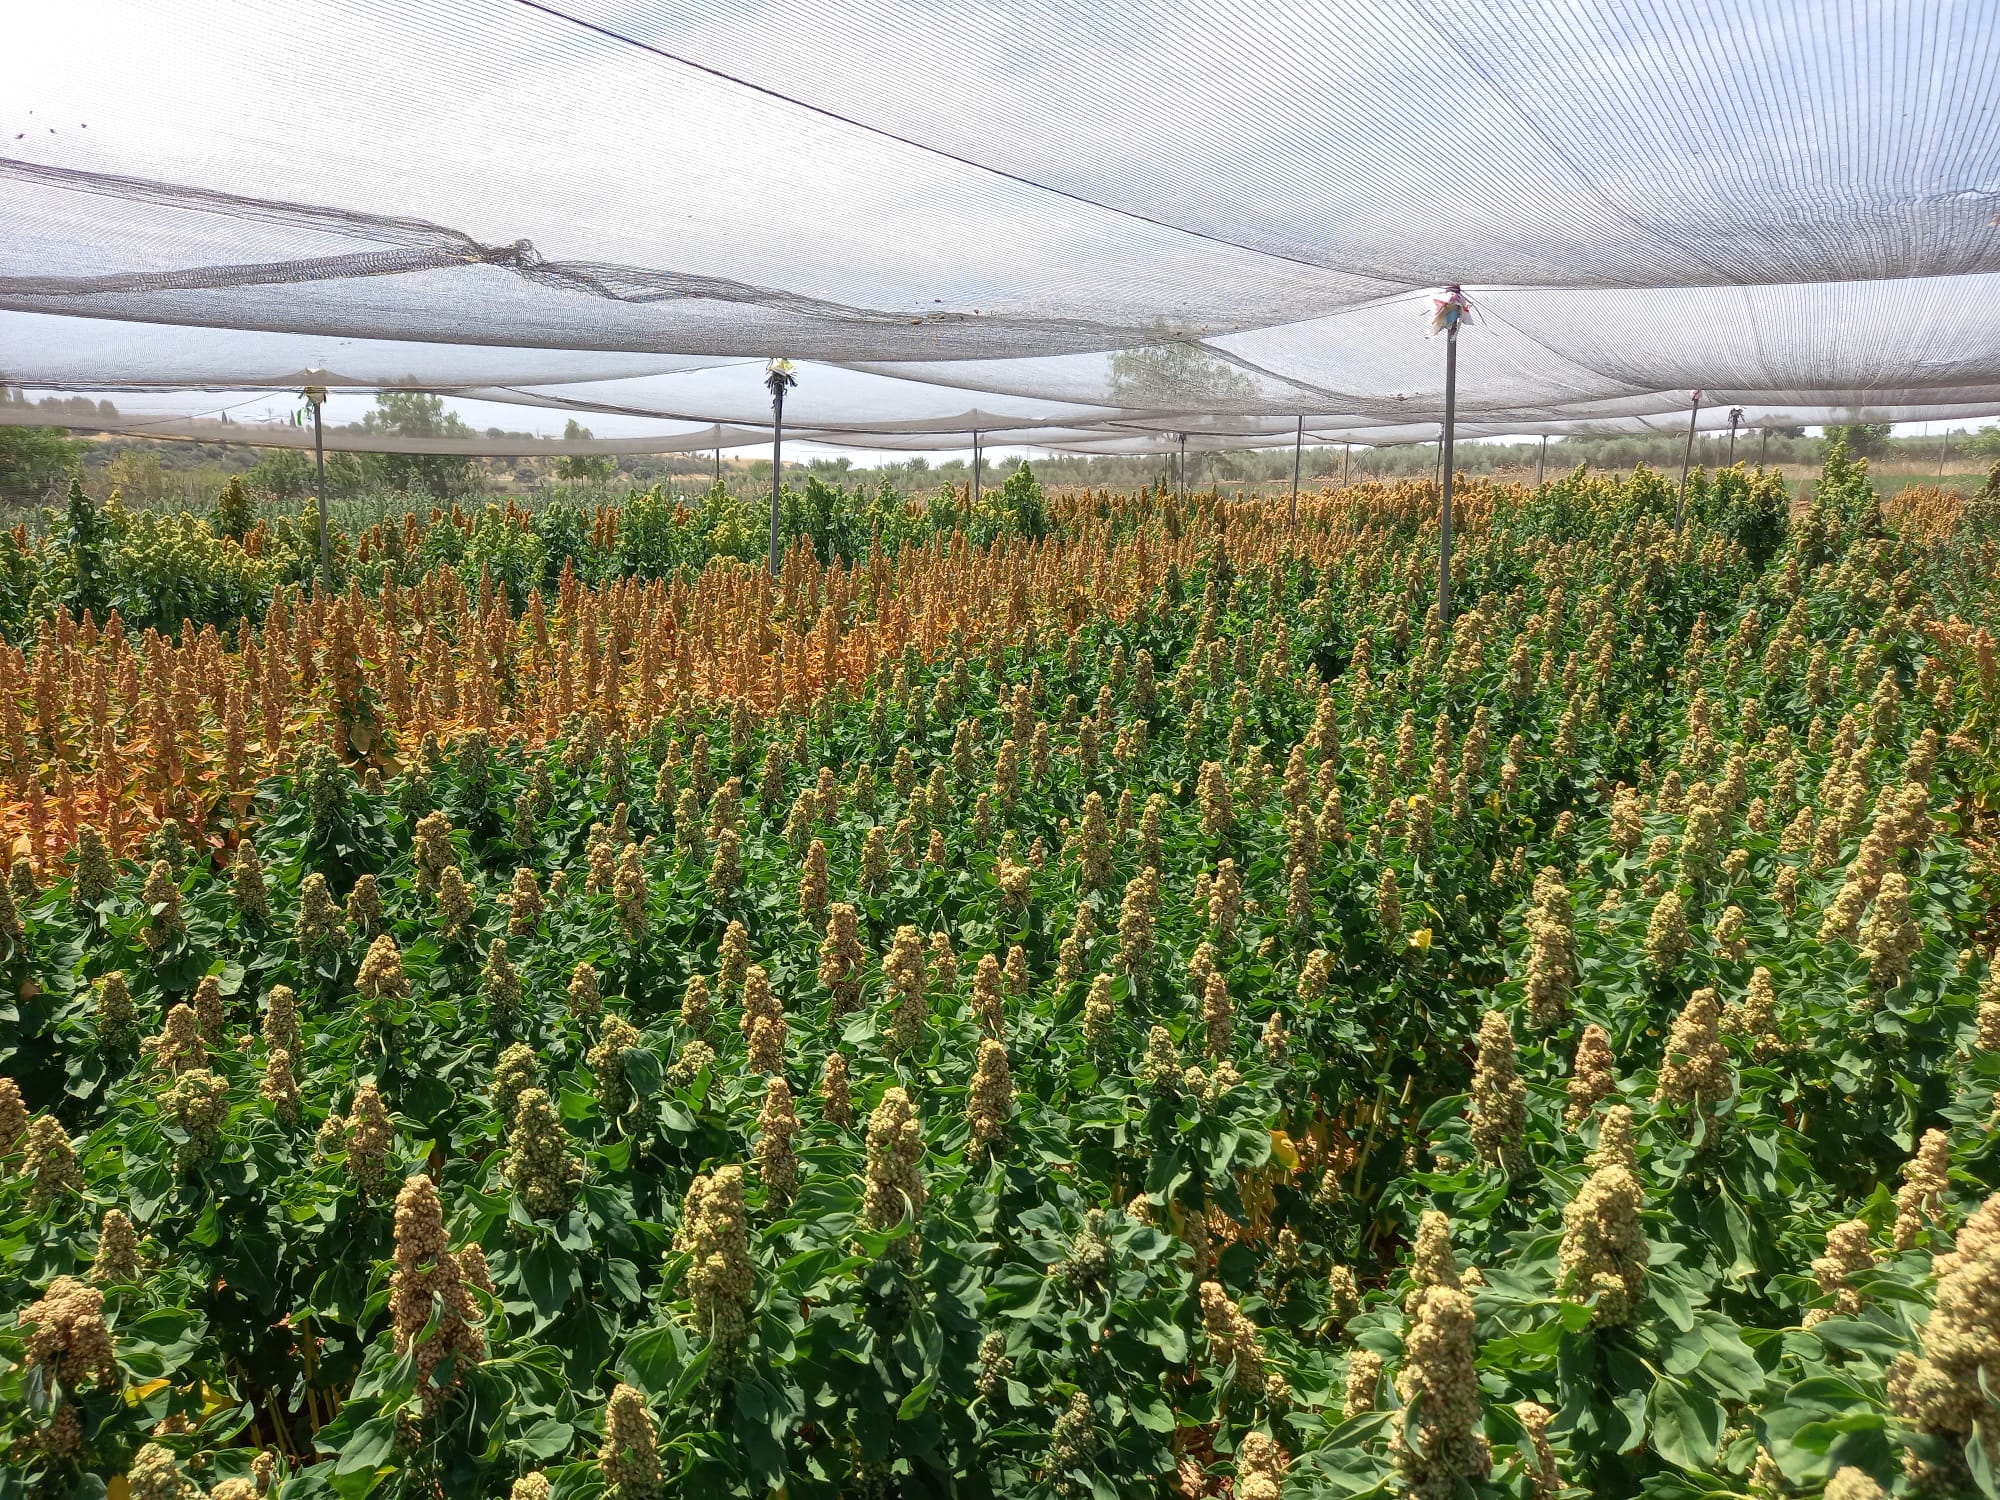 Agronomic evaluation of quinoa varieties with different management